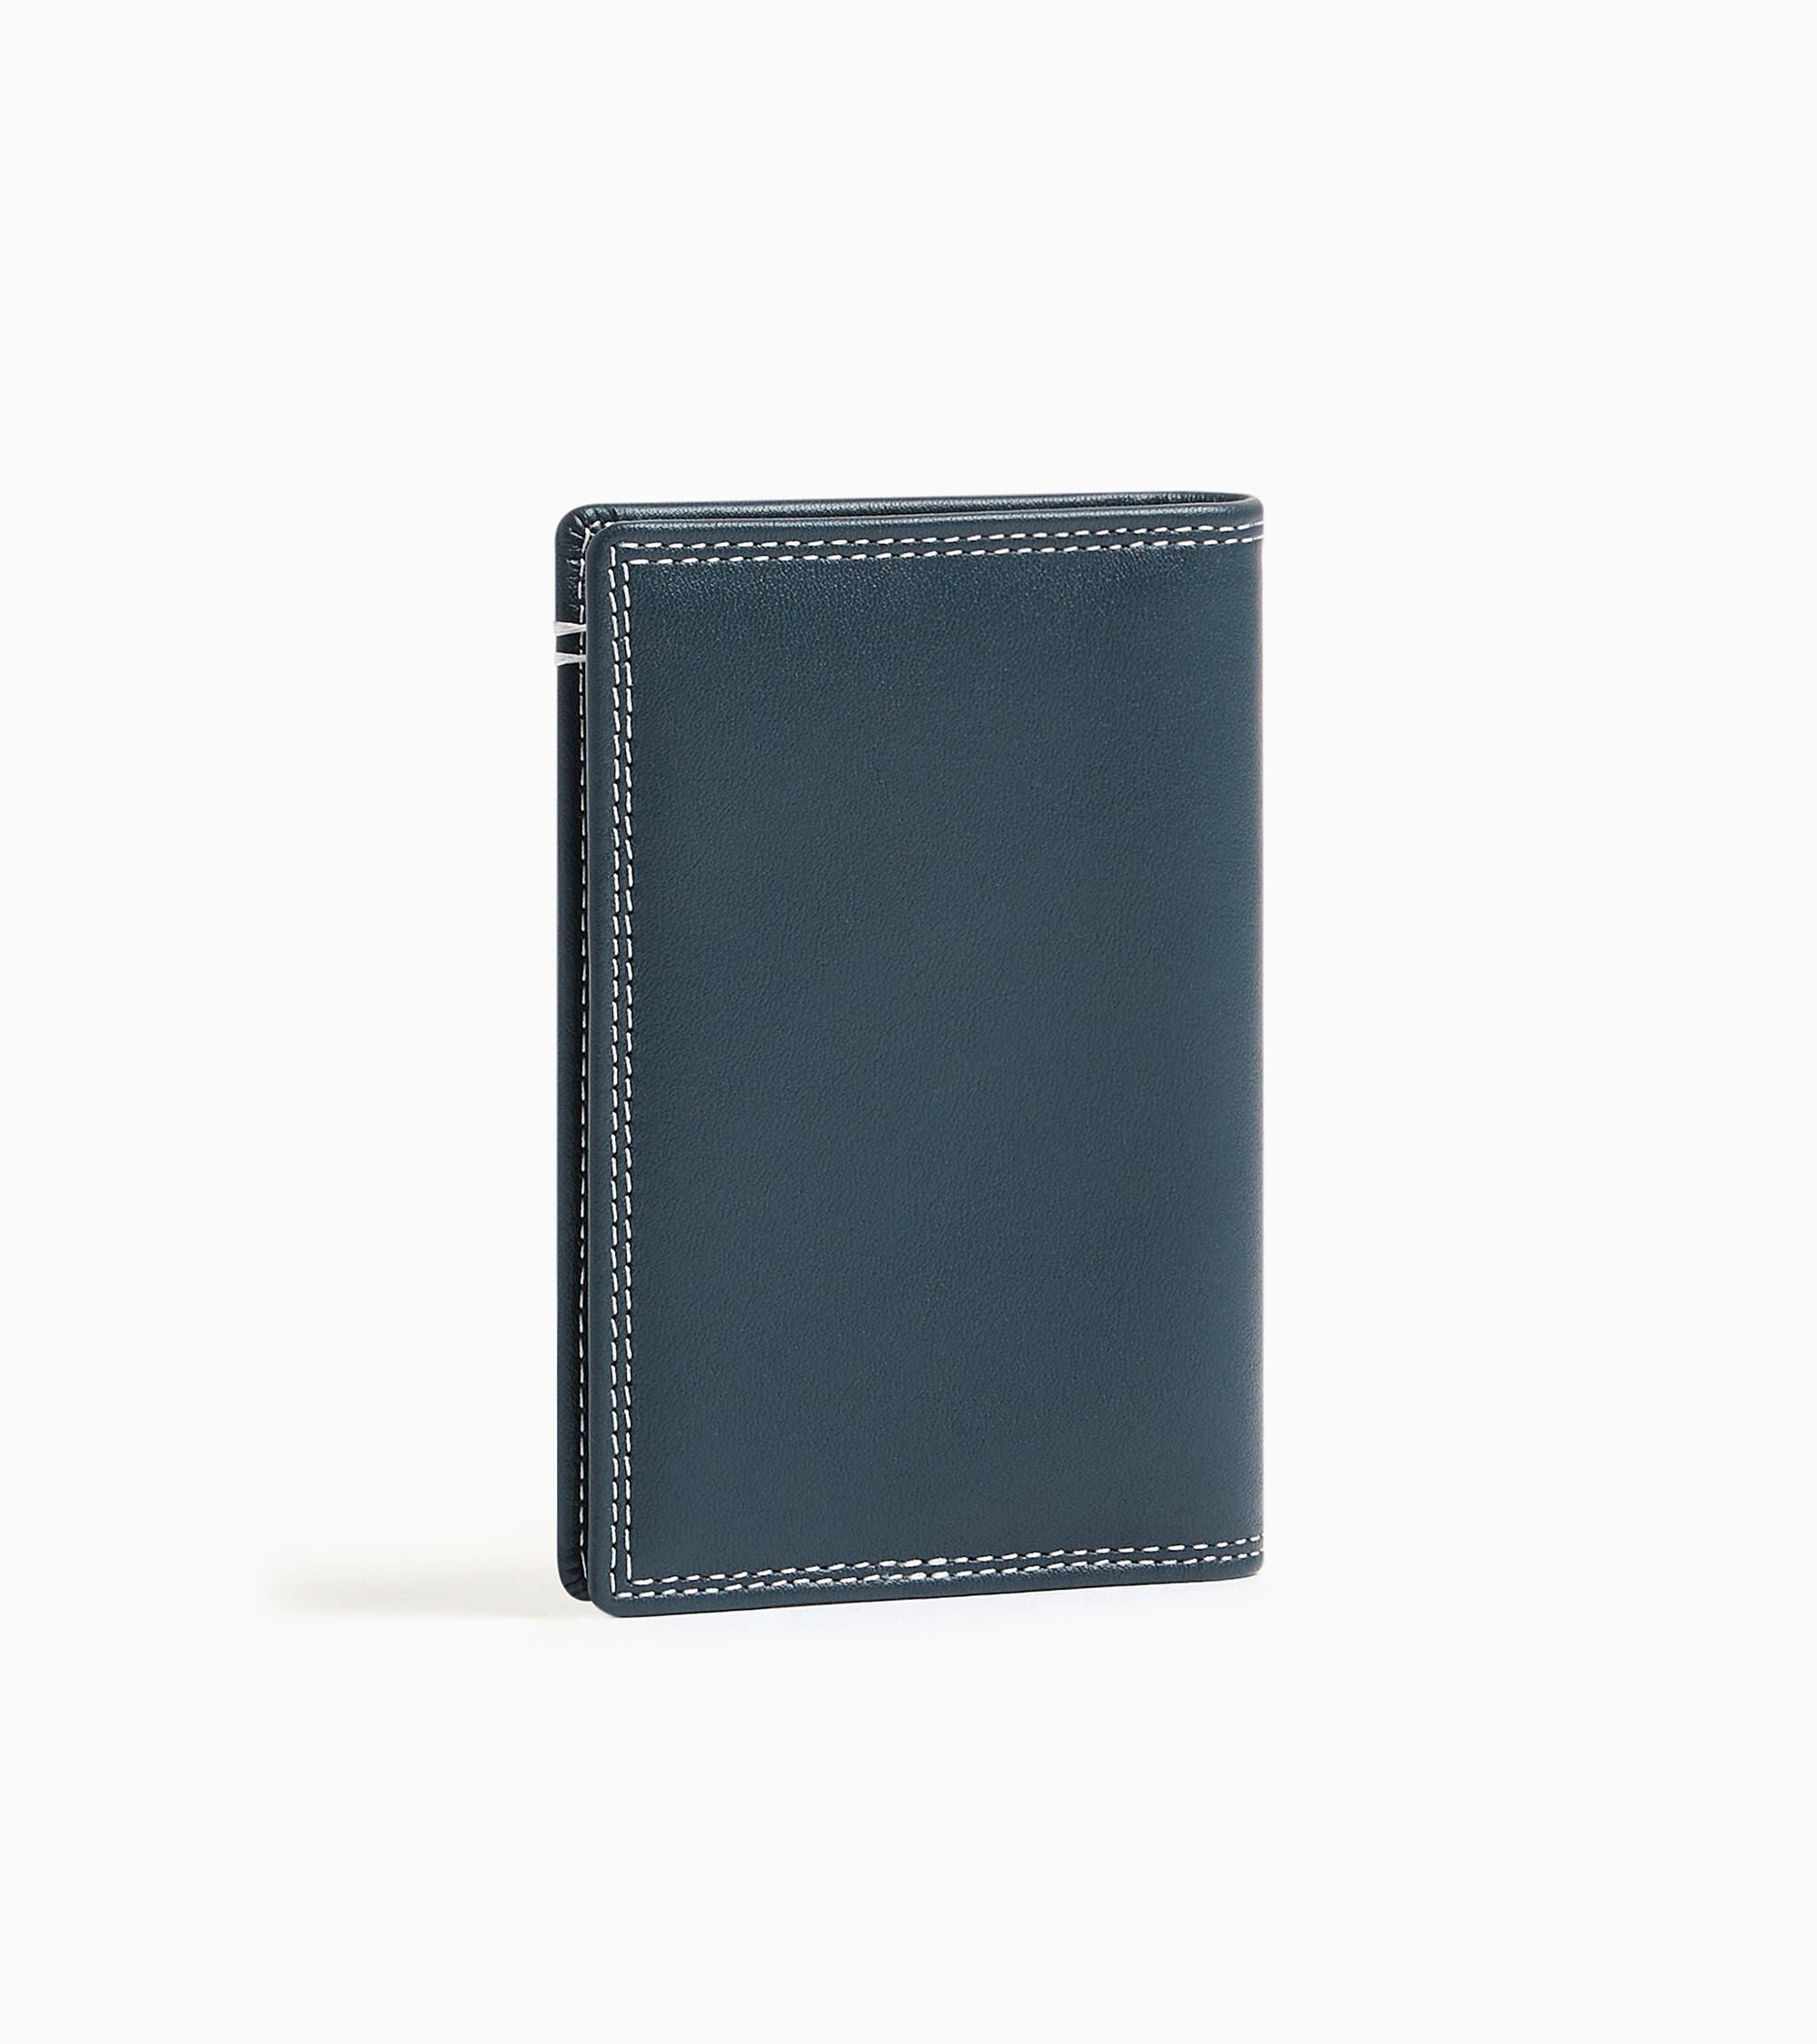 Martin smooth leather vertical card holder